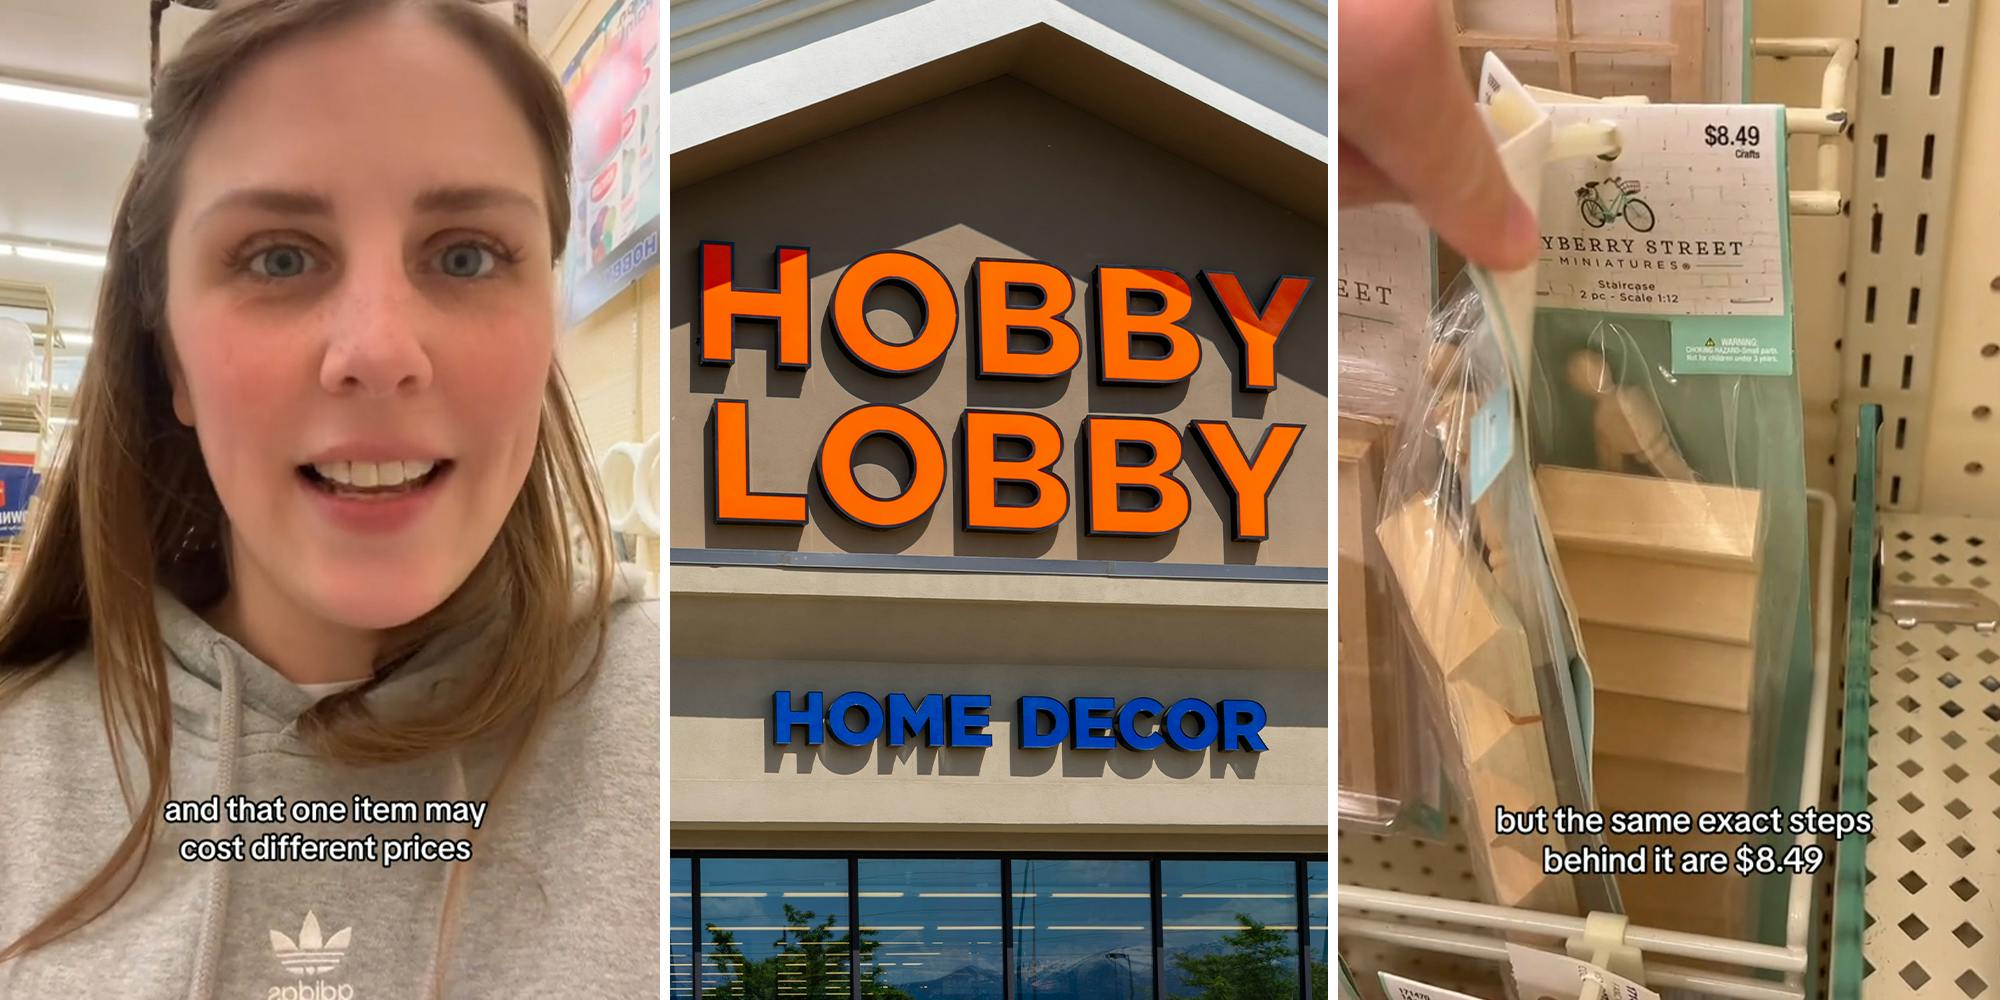 Shopper finds proof of Hobby Lobby putting different prices on the same products